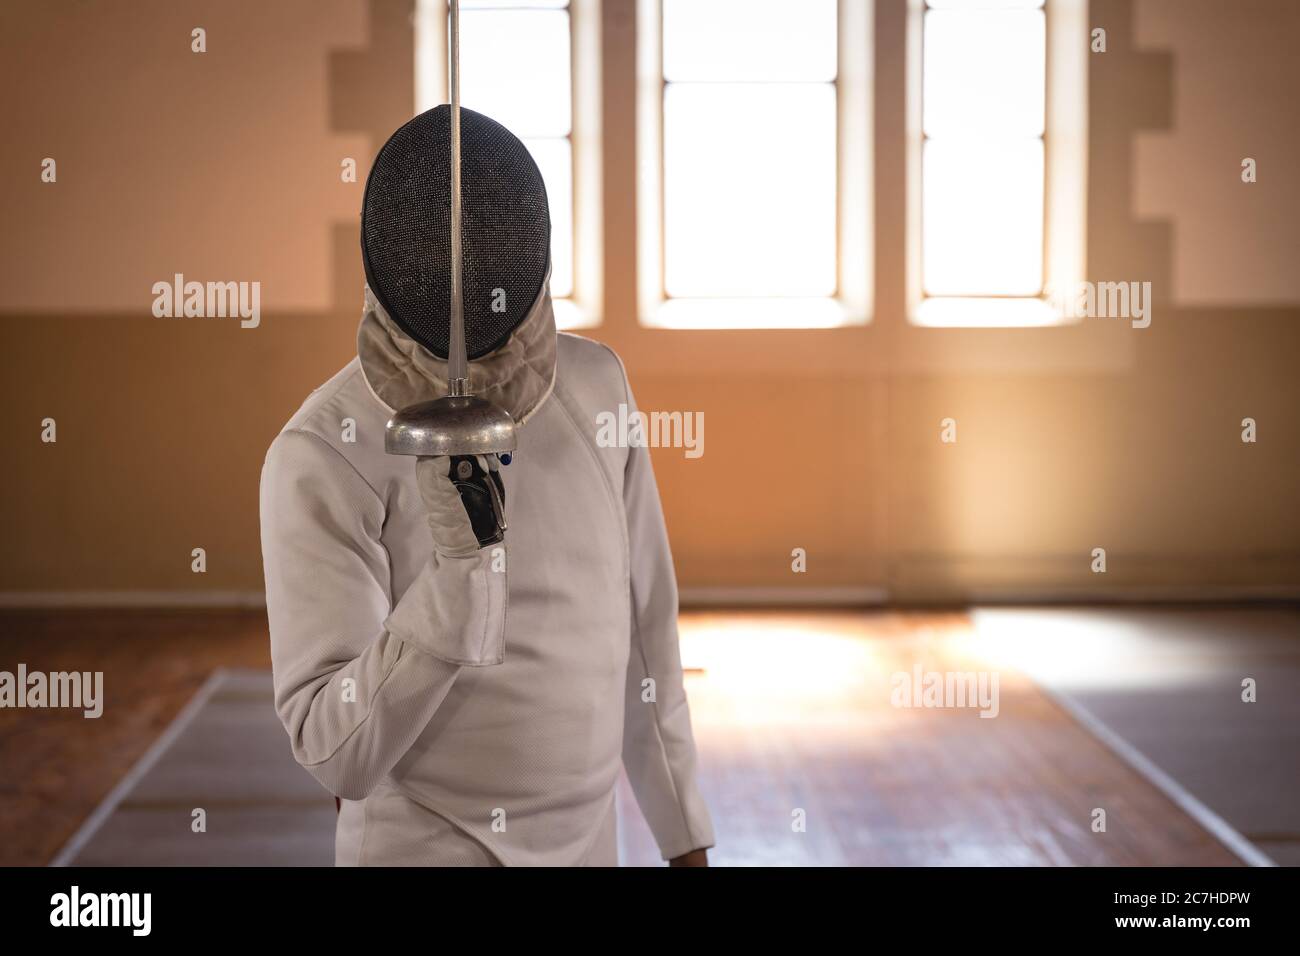 Man holding fencing foil Stock Photo